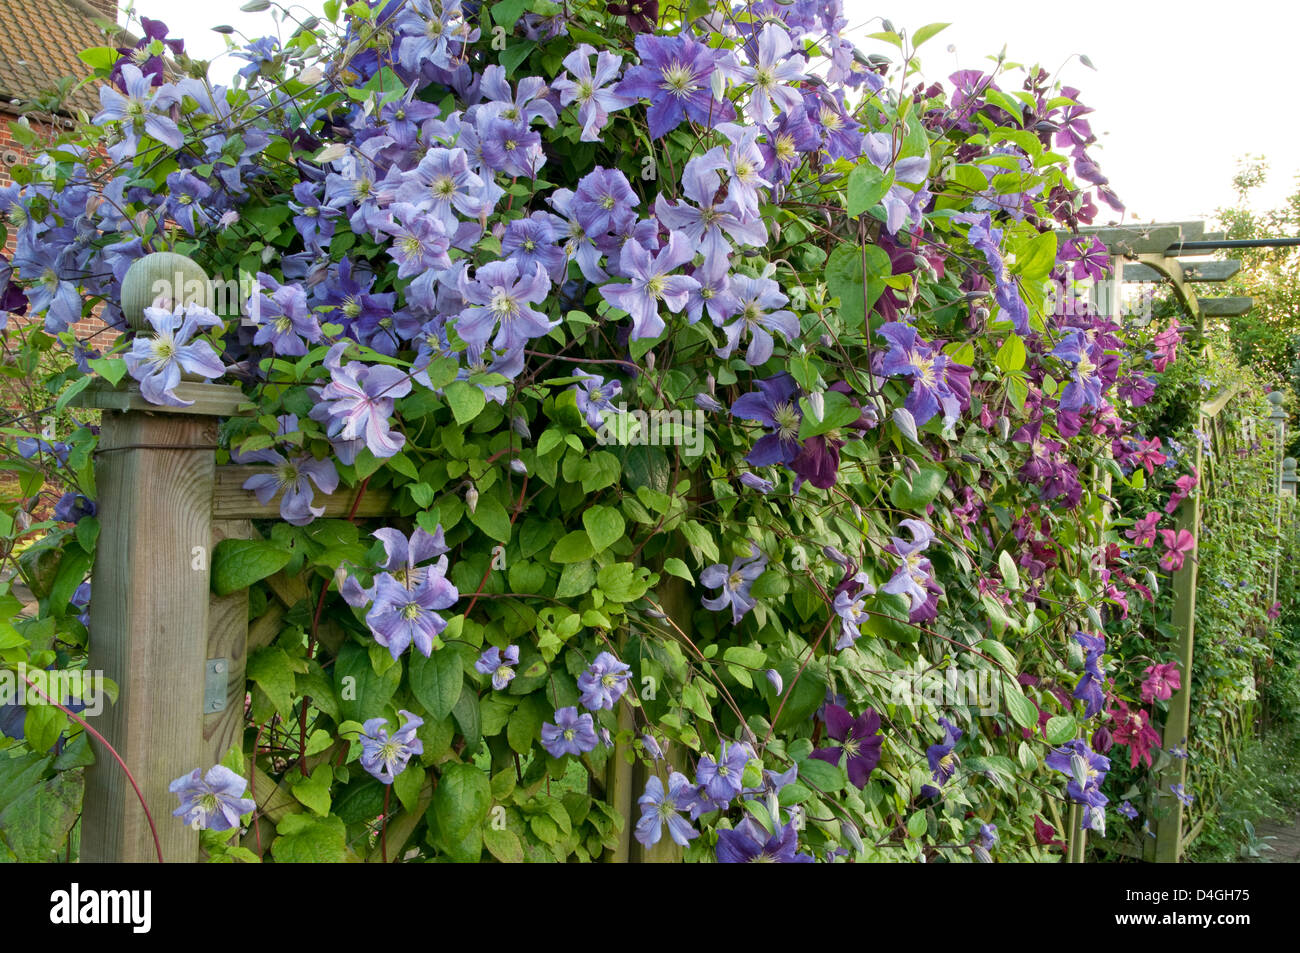 Clematis viticella cultivars including 'Prnce Charles', 'Wisley' and 'Etoile Violette' Stock Photo